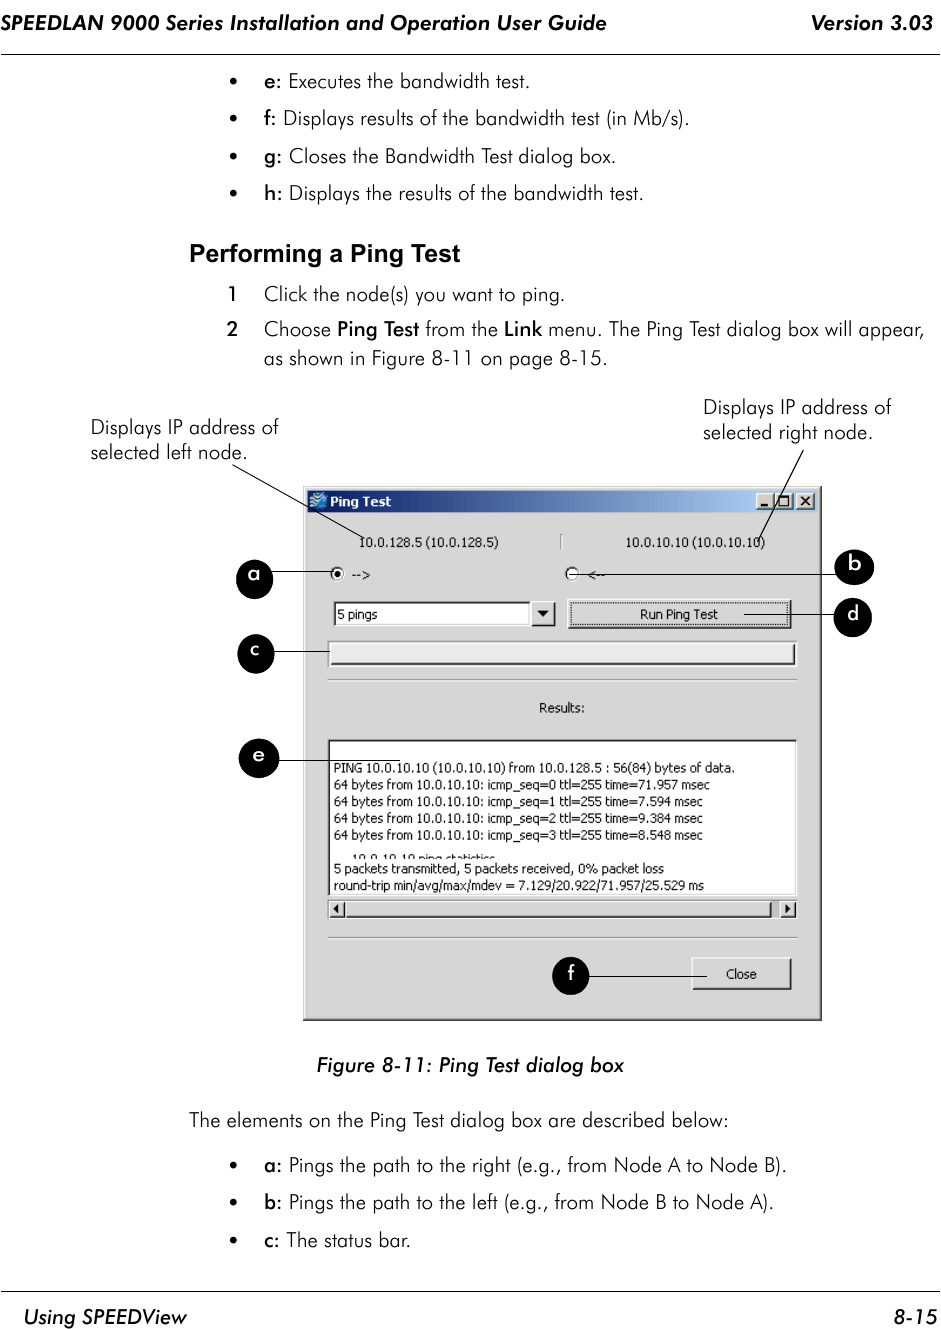 SPEEDLAN 9000 Series Installation and Operation User Guide                                 Version 3.03     Using SPEEDView 8-15                                                                                                                                                              •e: Executes the bandwidth test.•f: Displays results of the bandwidth test (in Mb/s).•g: Closes the Bandwidth Test dialog box.•h: Displays the results of the bandwidth test.Performing a Ping Test1Click the node(s) you want to ping.2Choose Ping Test from the Link menu. The Ping Test dialog box will appear, as shown in Figure 8-11 on page 8-15.Figure 8-11: Ping Test dialog boxThe elements on the Ping Test dialog box are described below:•a: Pings the path to the right (e.g., from Node A to Node B).•b: Pings the path to the left (e.g., from Node B to Node A).•c: The status bar.adcefbDisplays IP address of selected left node.Displays IP address of selected right node.